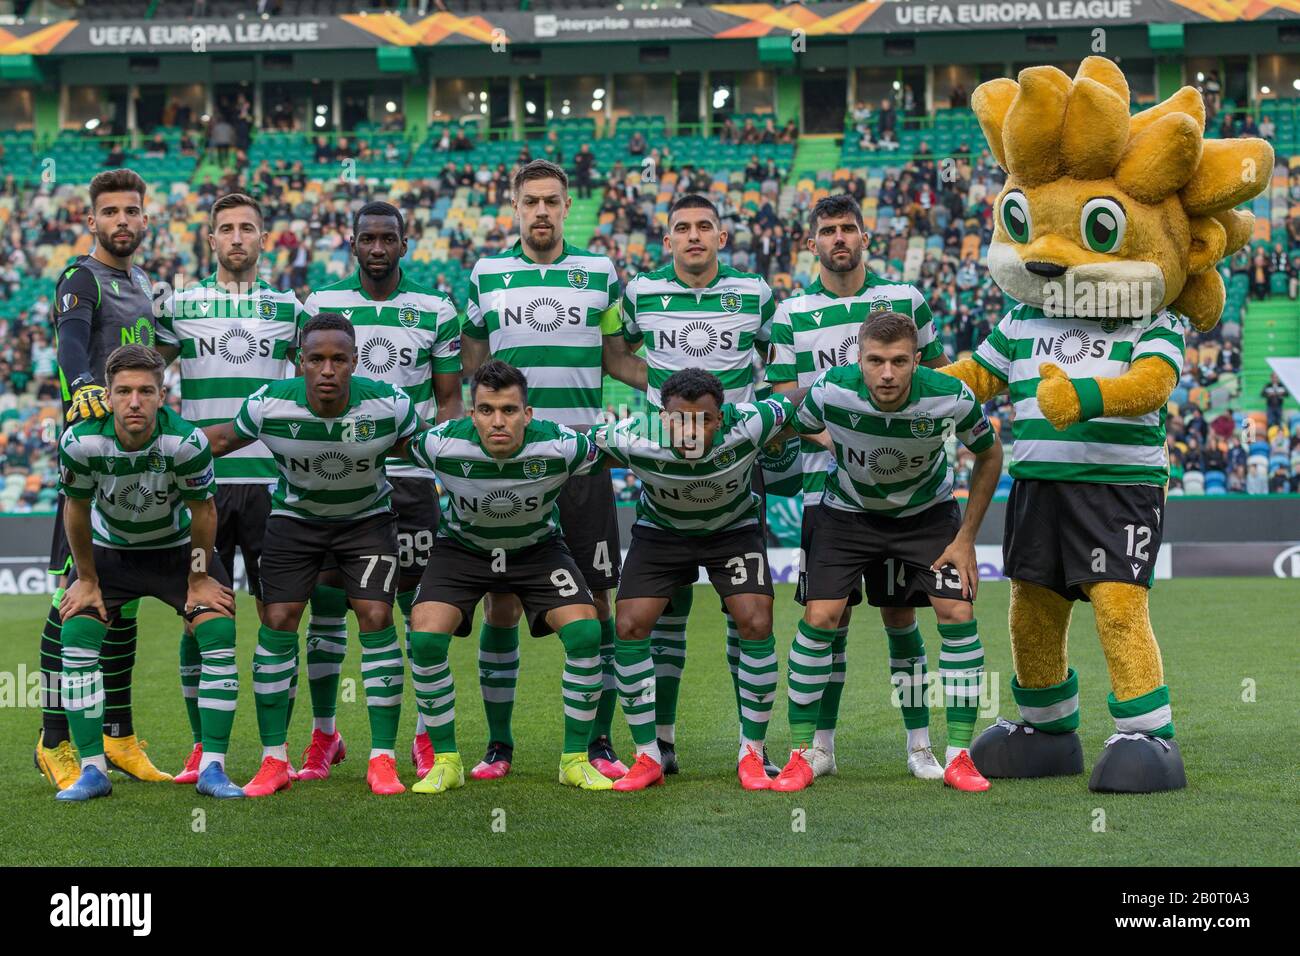 Lisbon, Portugal. 20th Feb, 2020. February 20, 2020. Lisbon, Portugal. Sporting starting team for the game of the UEFA Europa League, Sporting CP vs Istanbul Basaksehir Credit: Alexandre de Sousa/Alamy Live News Stock Photo